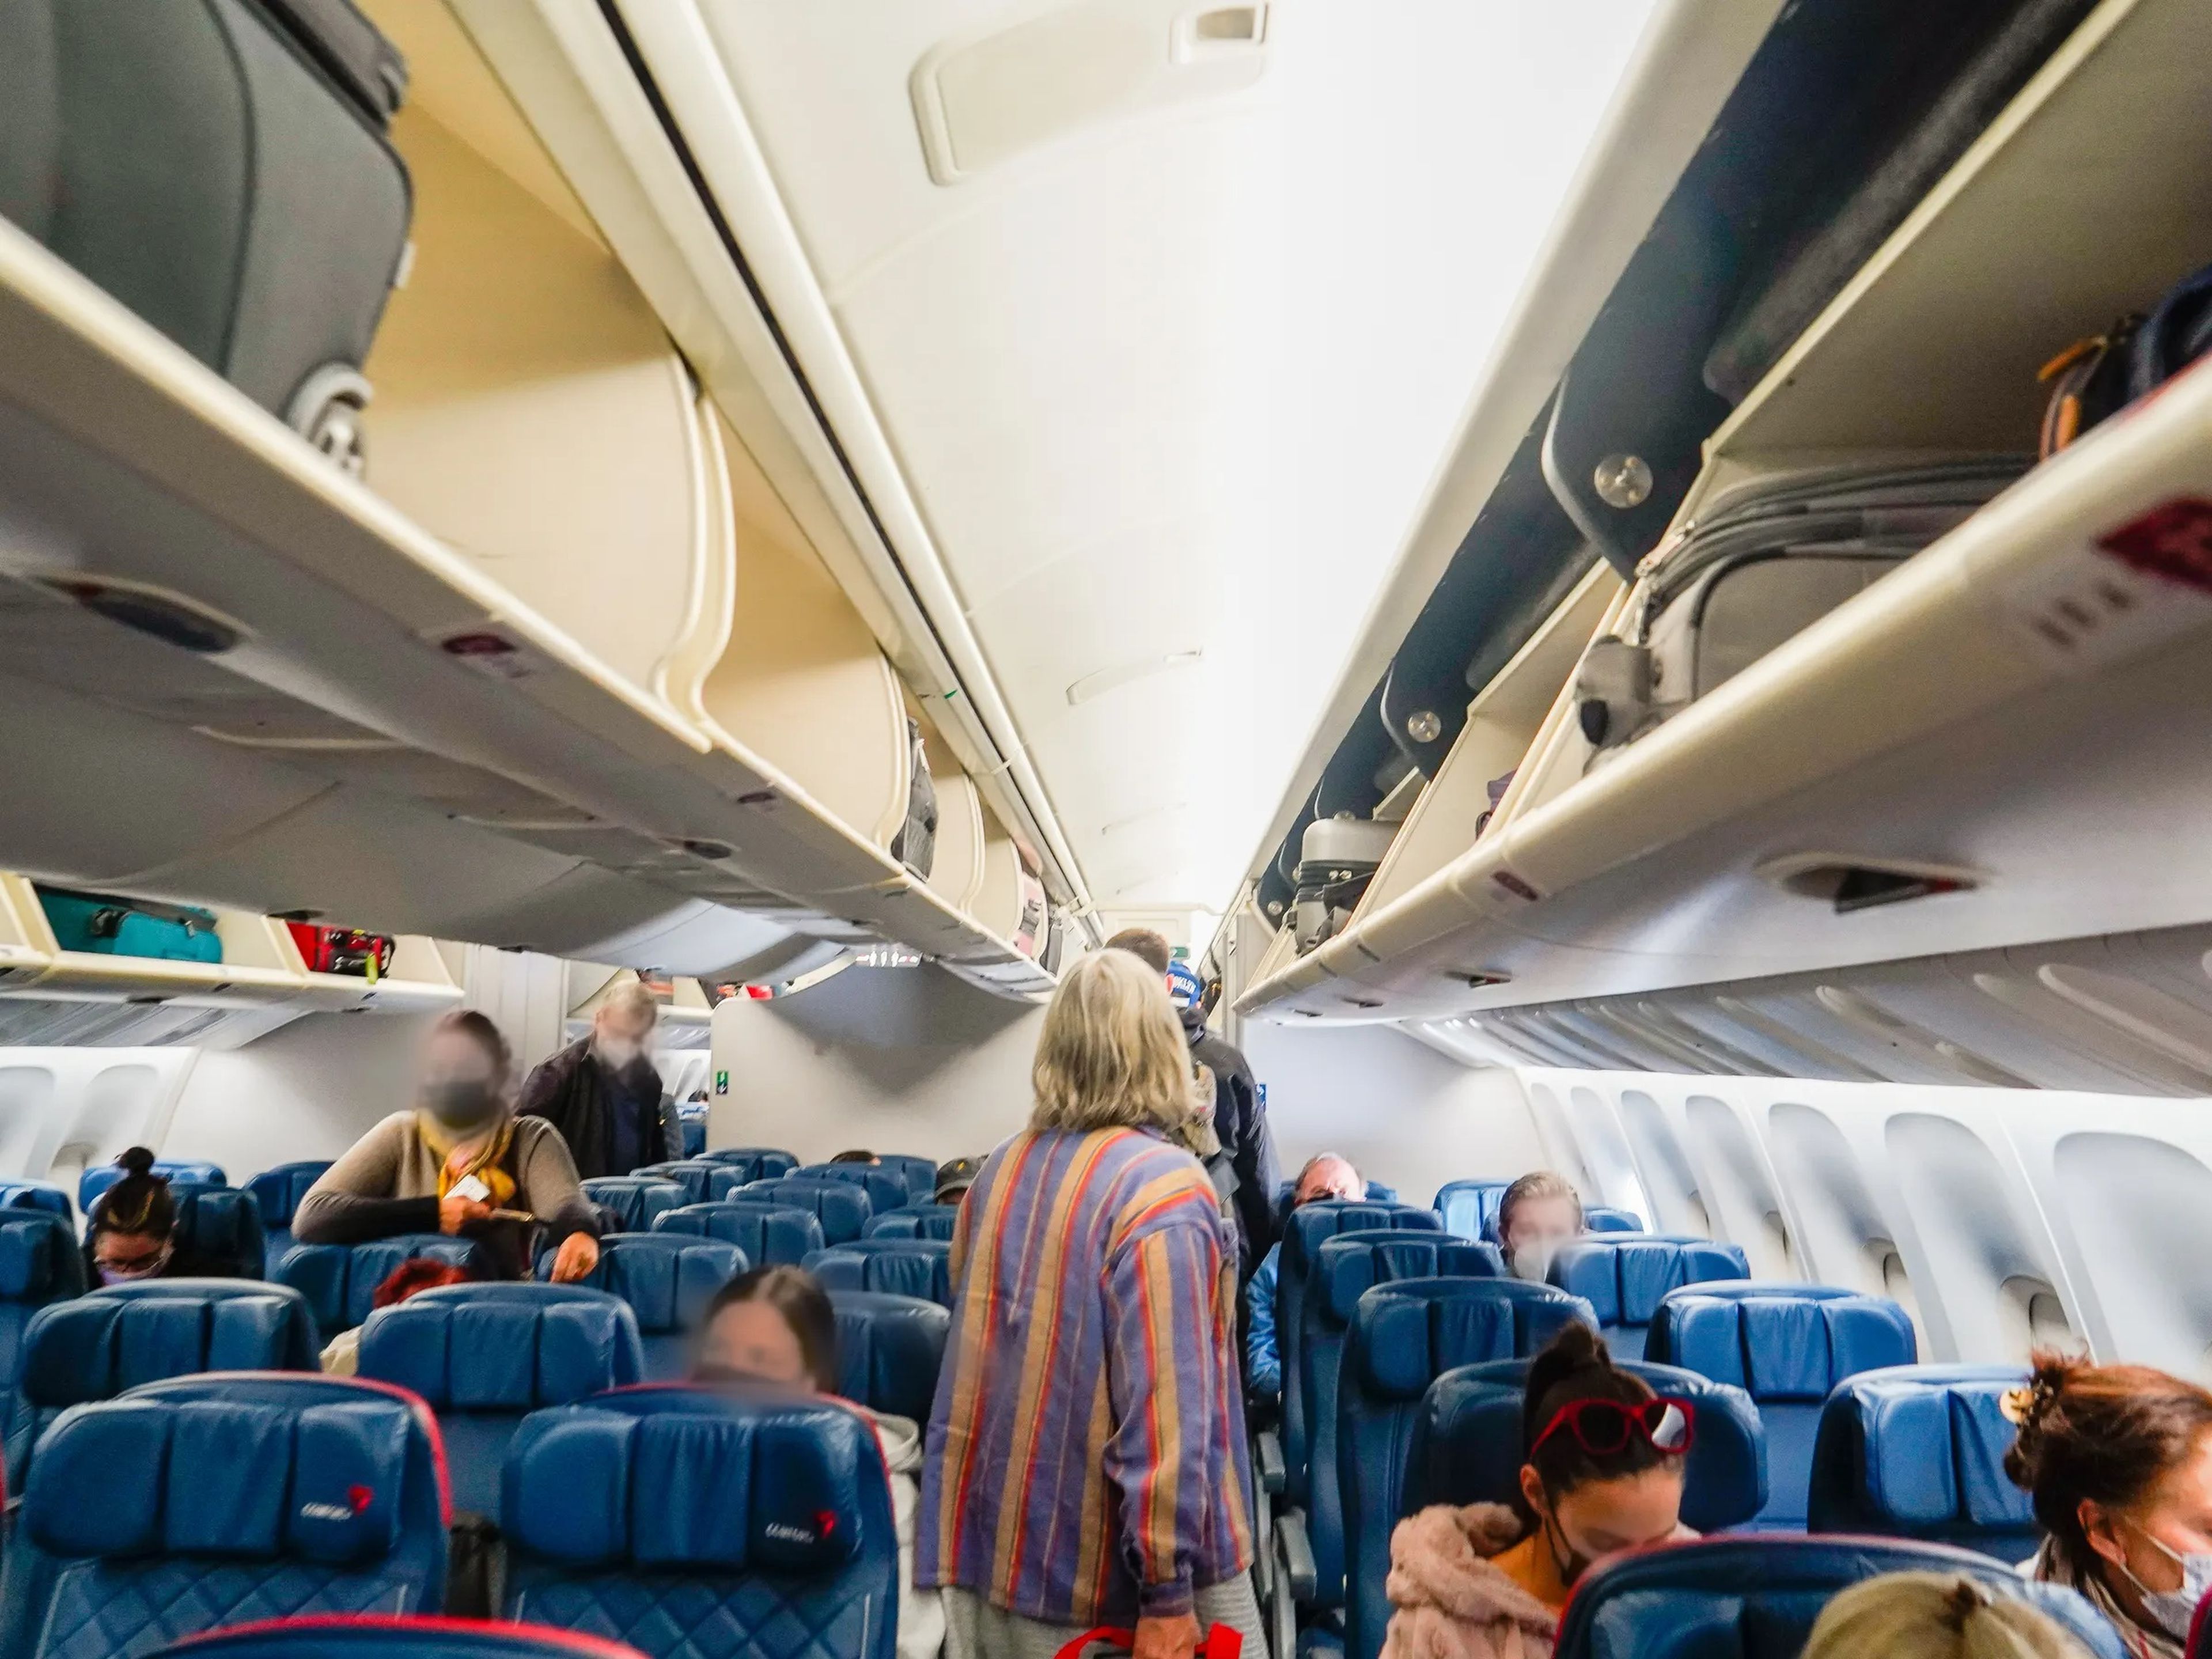 People board a plane with blue seats, luggages in overhead bin space are visible on the lop left and right